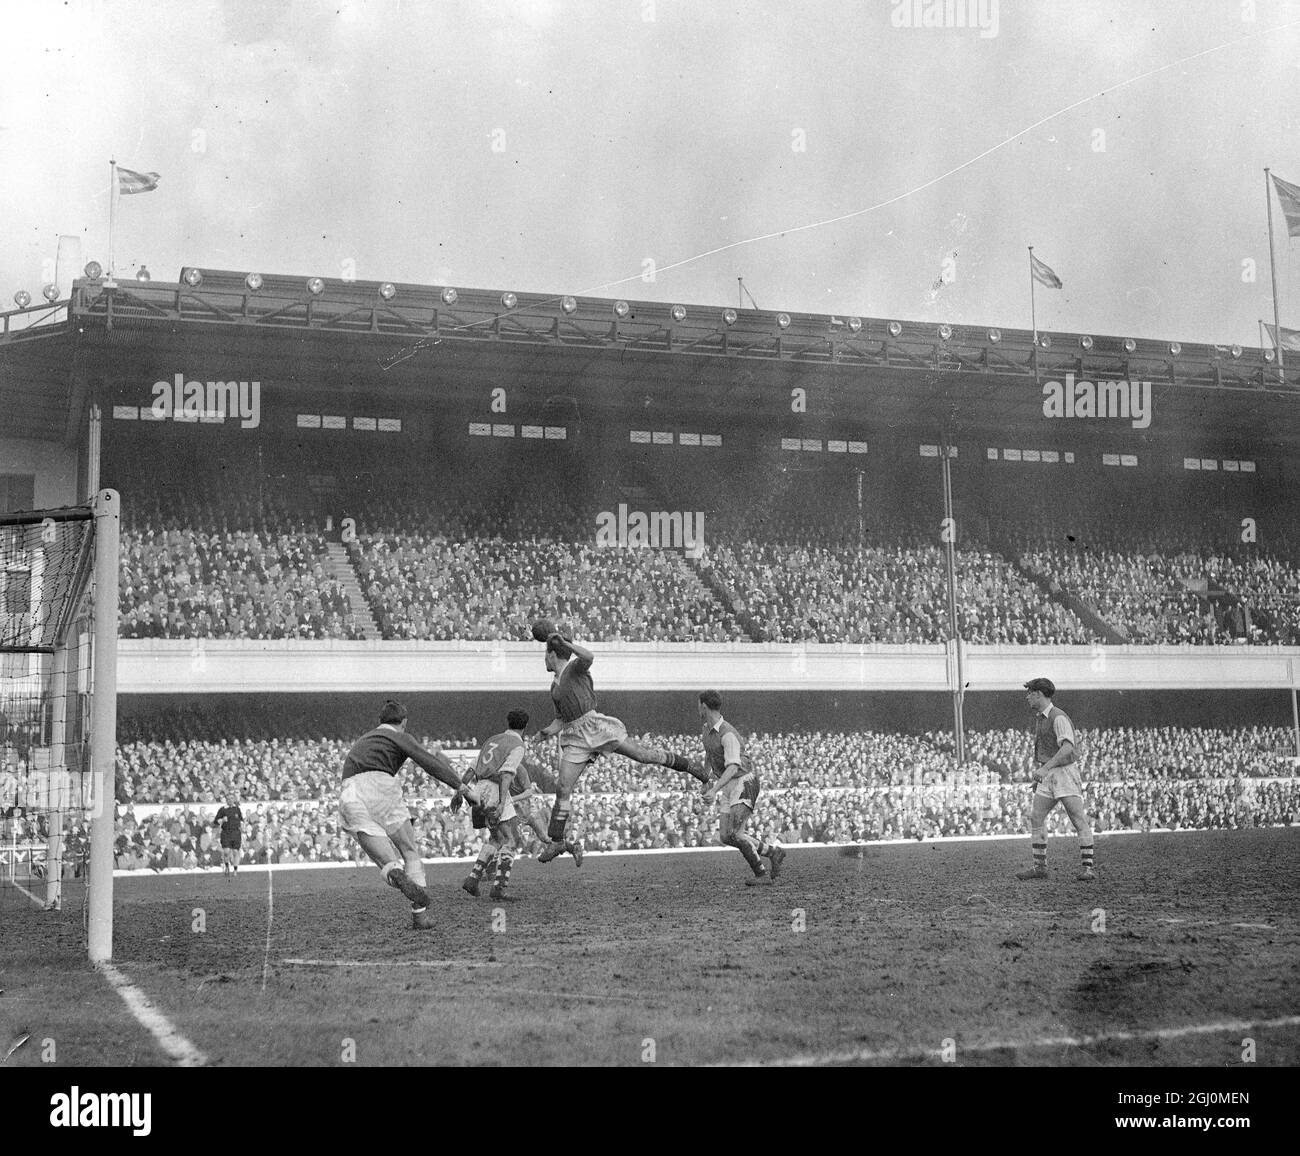 London England Arsenal winners at local London Derby football match against Chelsea at Highbury footballer Greaves of Chelsea leaps above Arsenal defenders and Arsenals goalkeeper Kelsey 8th March 1958. Stock Photo